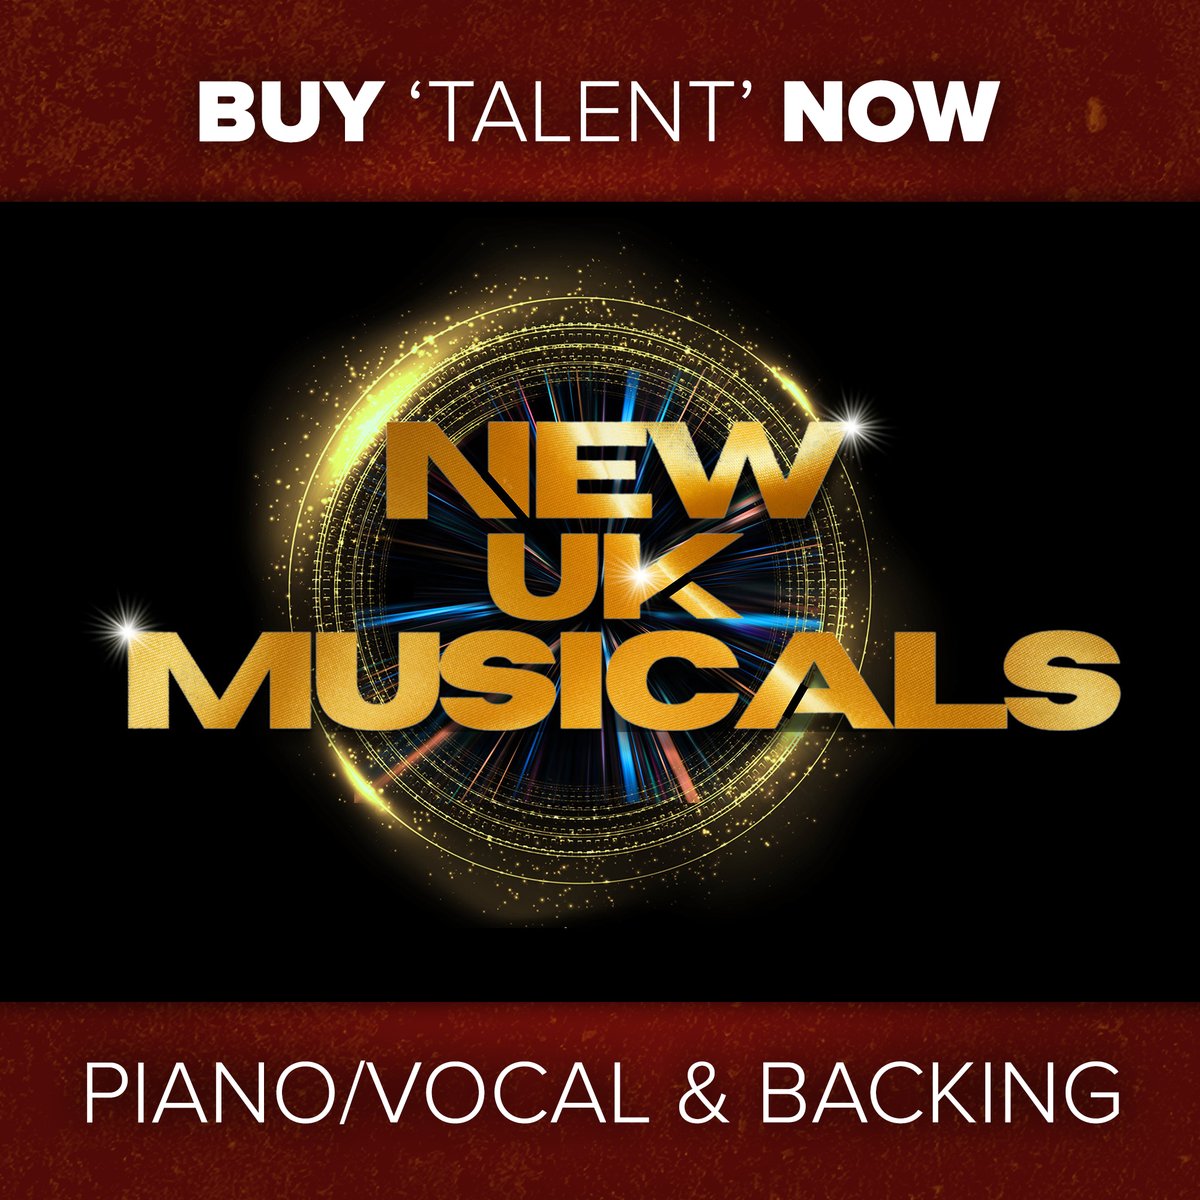 🎼TALENT AVAILABLE NOW🎼

You can now buy the Talent sheet music and backing piano track through @newukmusicals! We’re honoured to be invited to join this group - they sell sheet music for some of the best new musical writers in the country🎨

Go look: newukmusicals.co.uk/writers-detail…